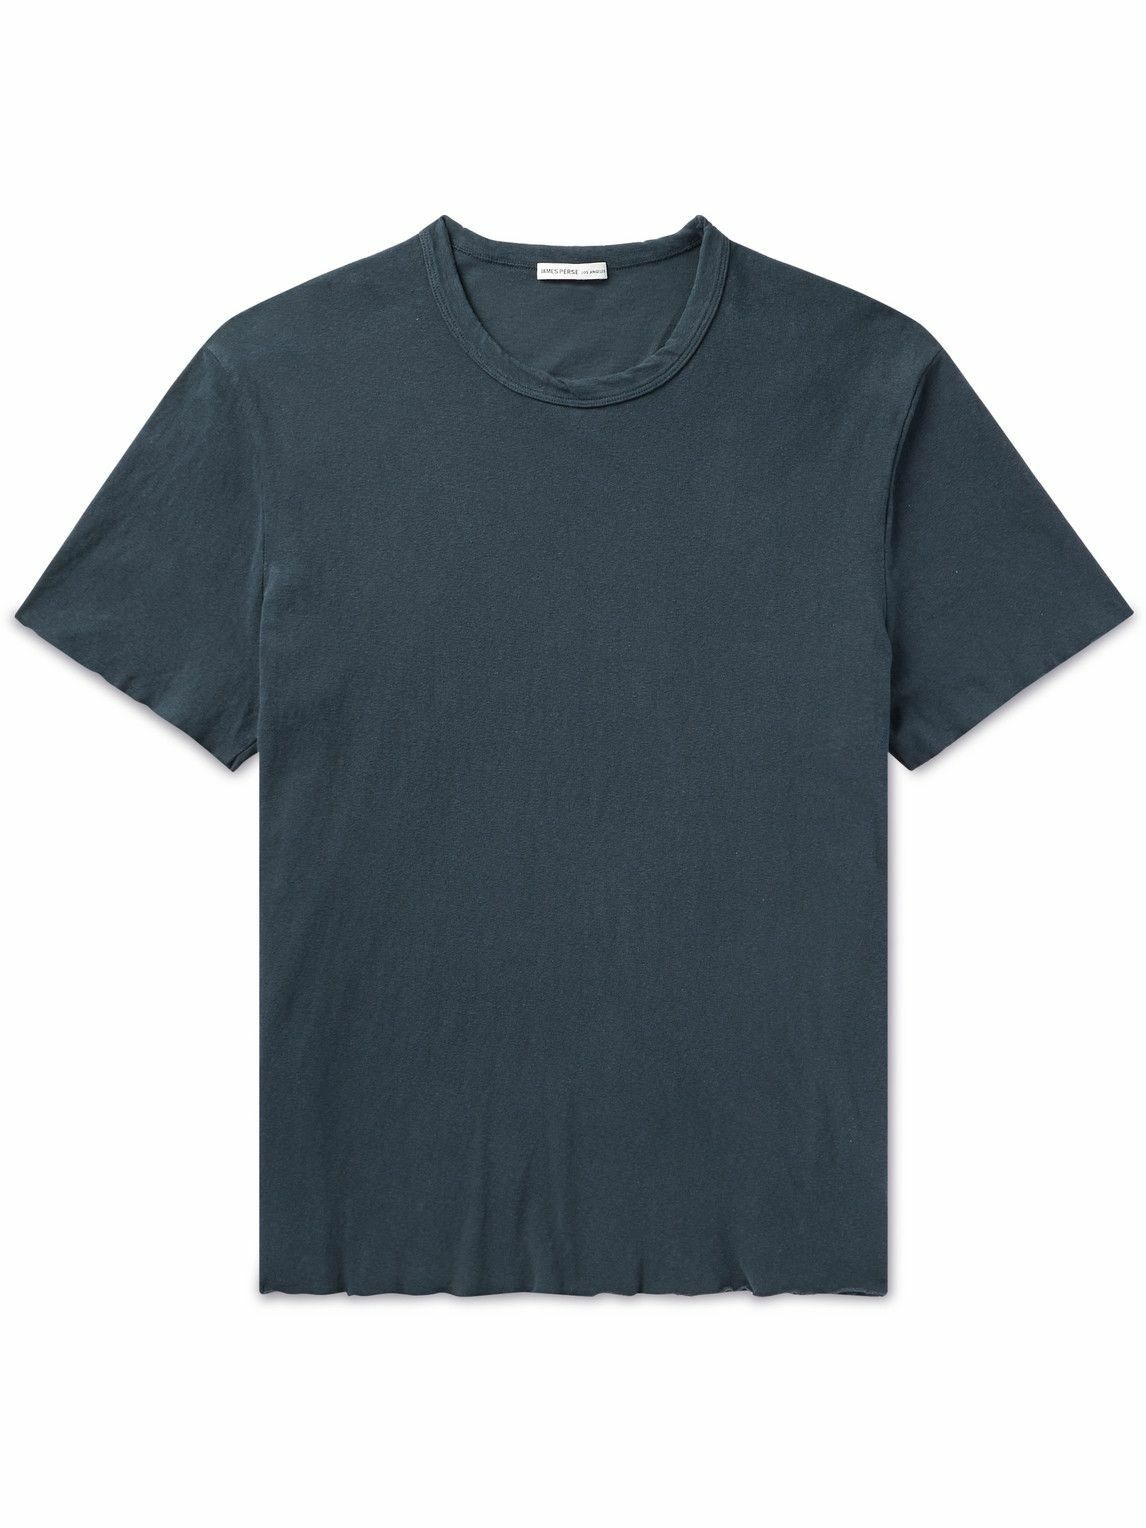 James Perse - Recycled Cotton-Jersey T-Shirt - Blue James Perse